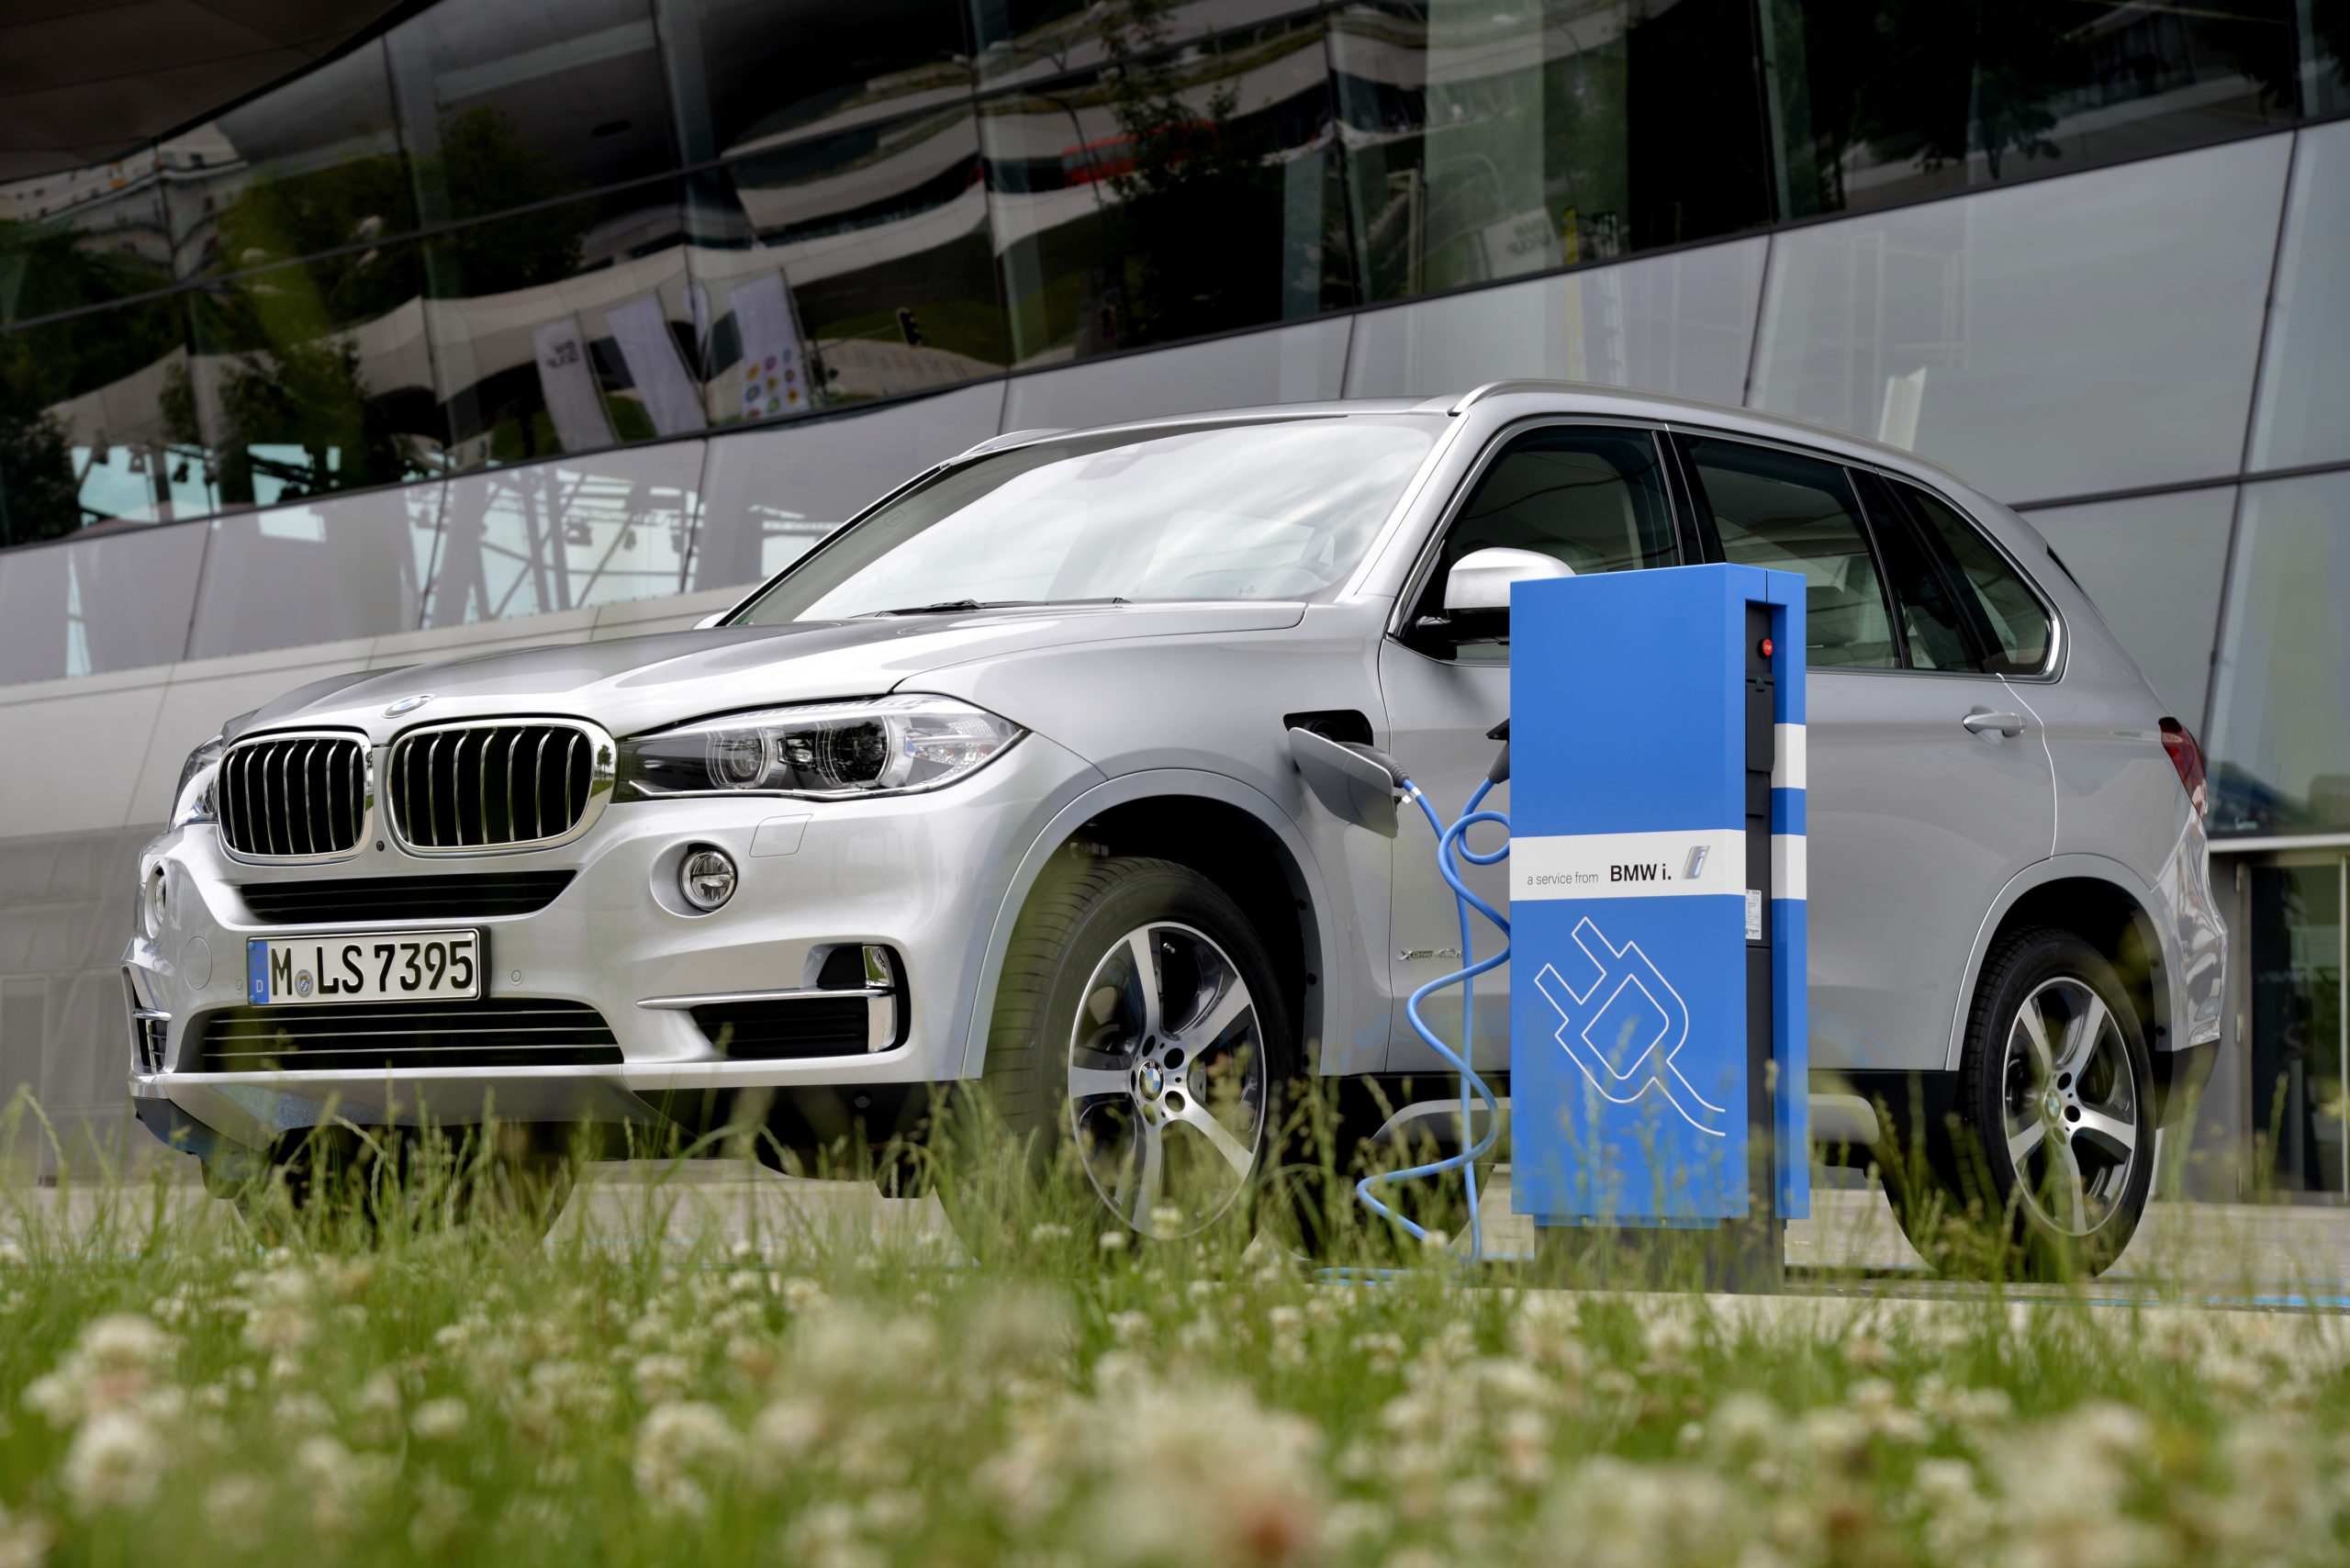 BMW rewards consequent PHEV driving